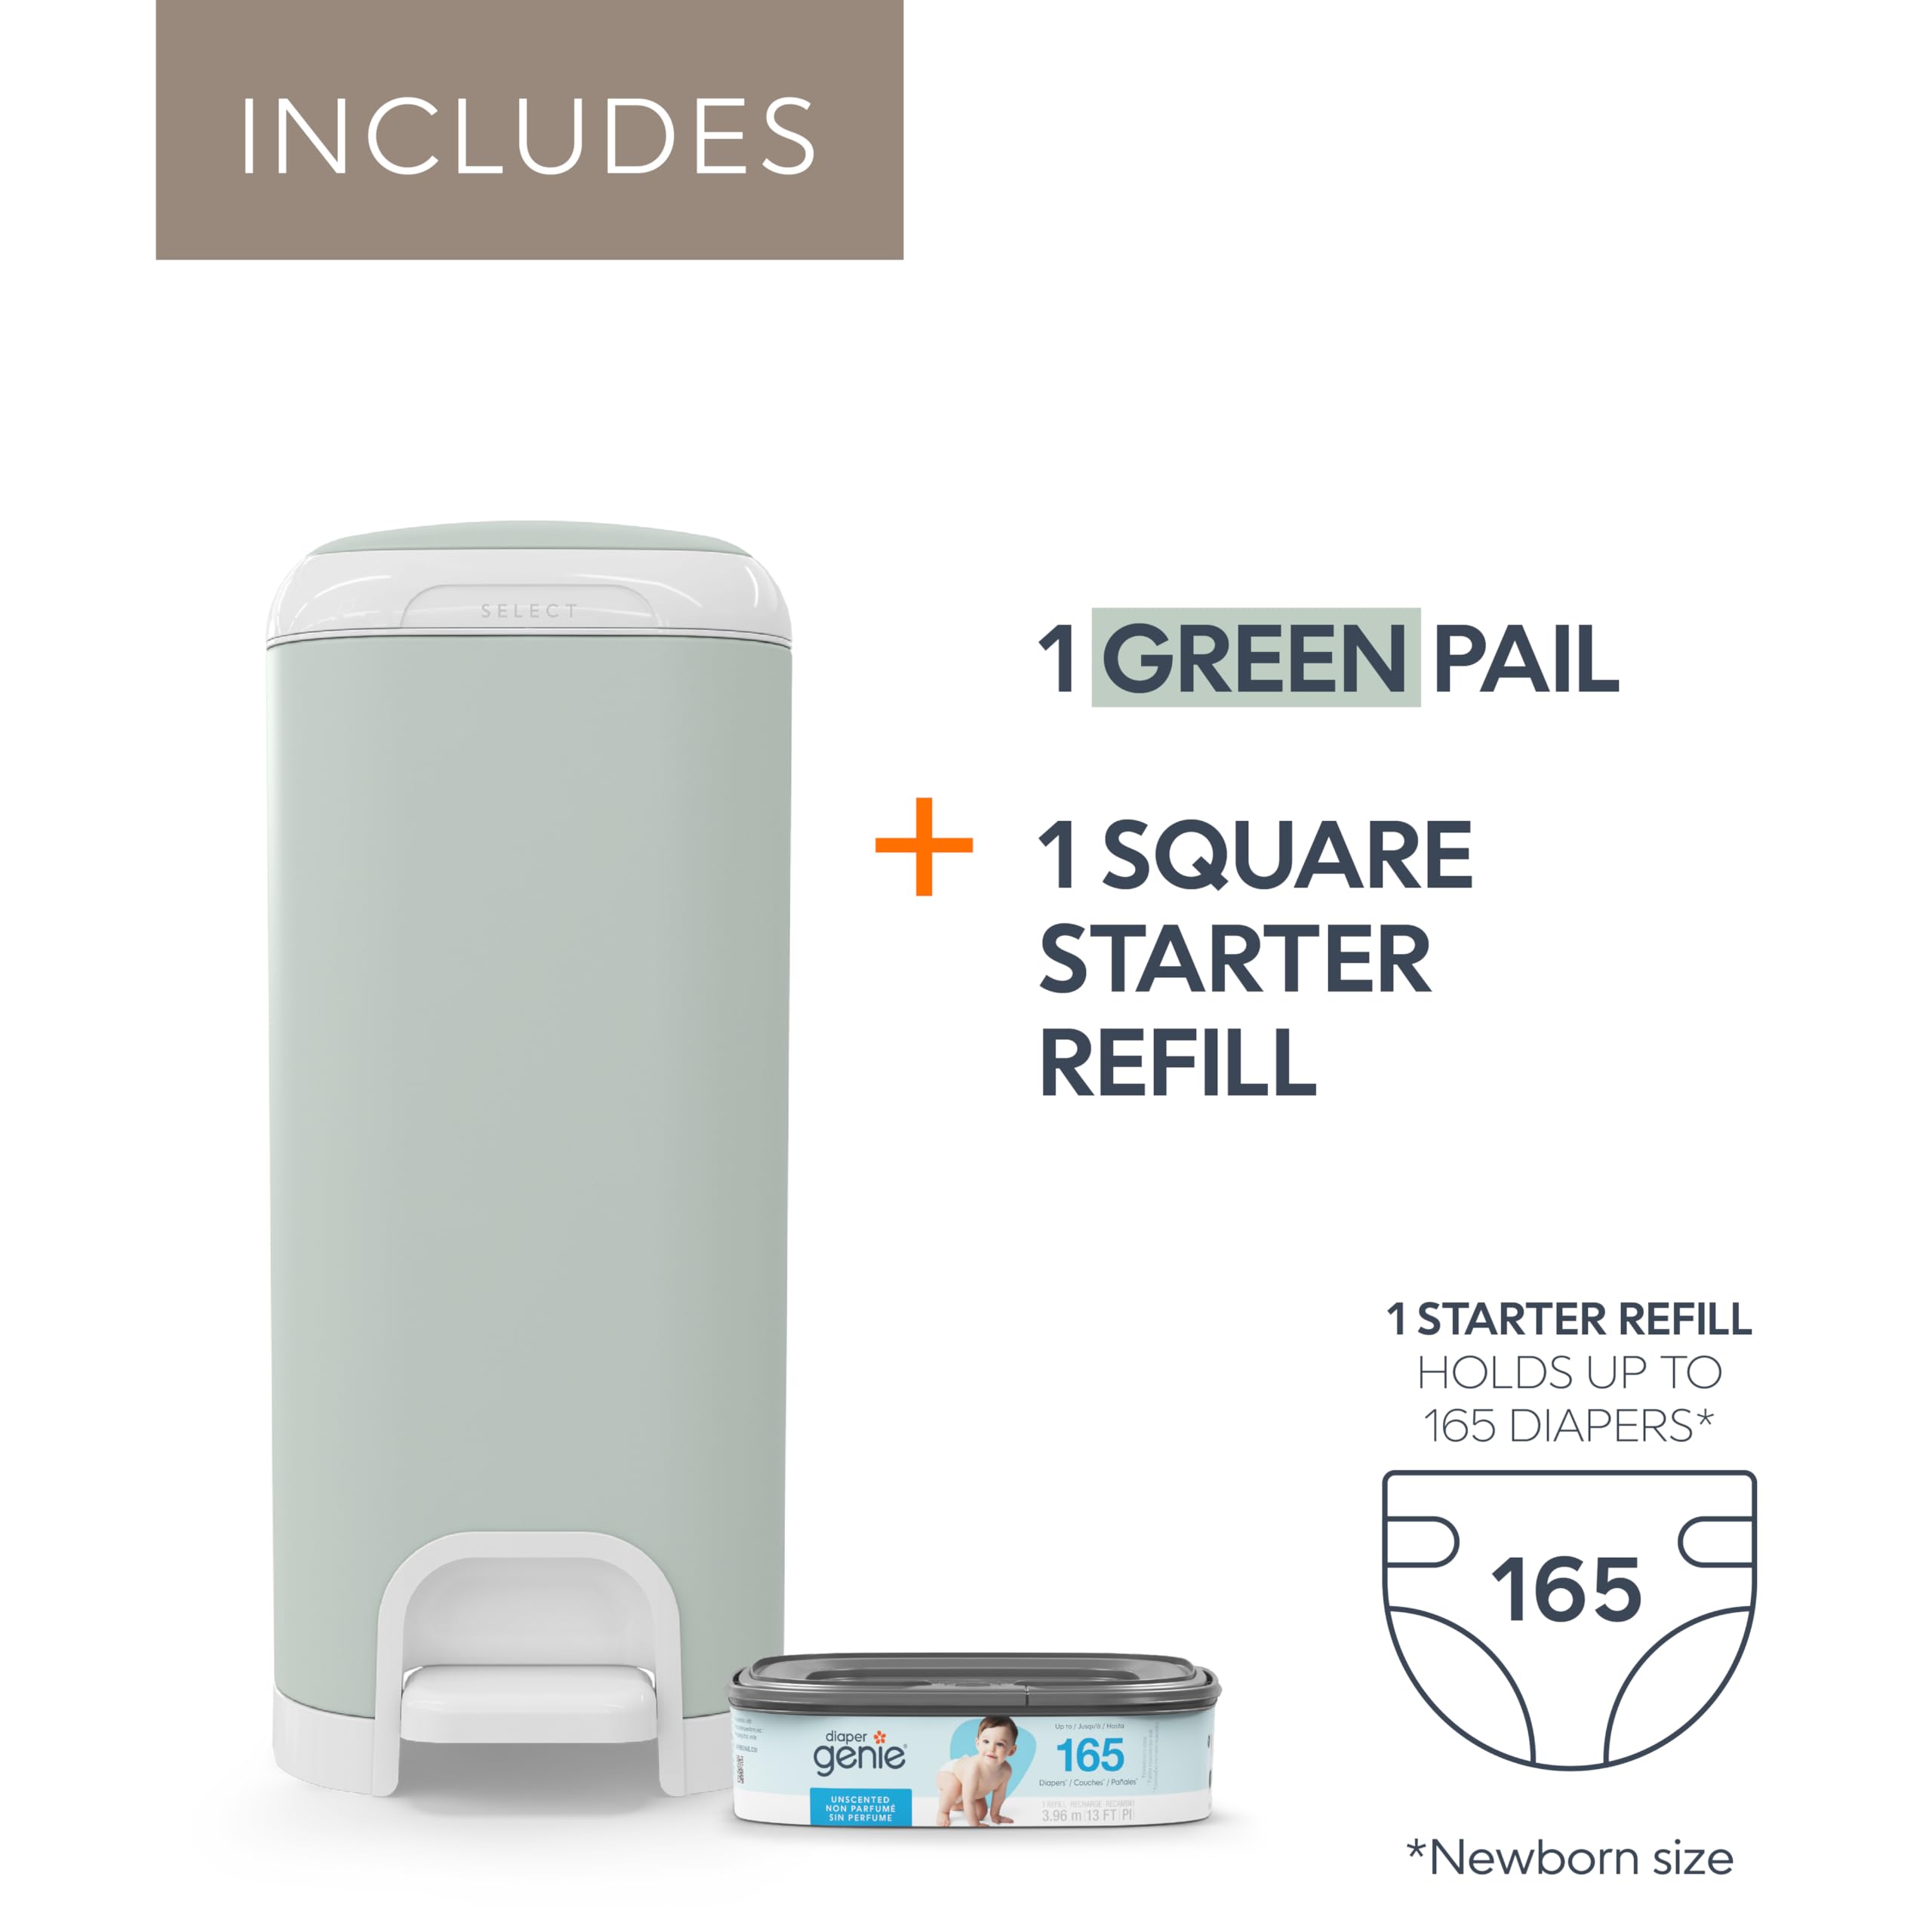 Diaper Genie Select Pail (Green) is Made of Durable Stainless Steel and Includes 1 Starter Square Refill That can Hold up to 165 Newborn-Sized Diapers.